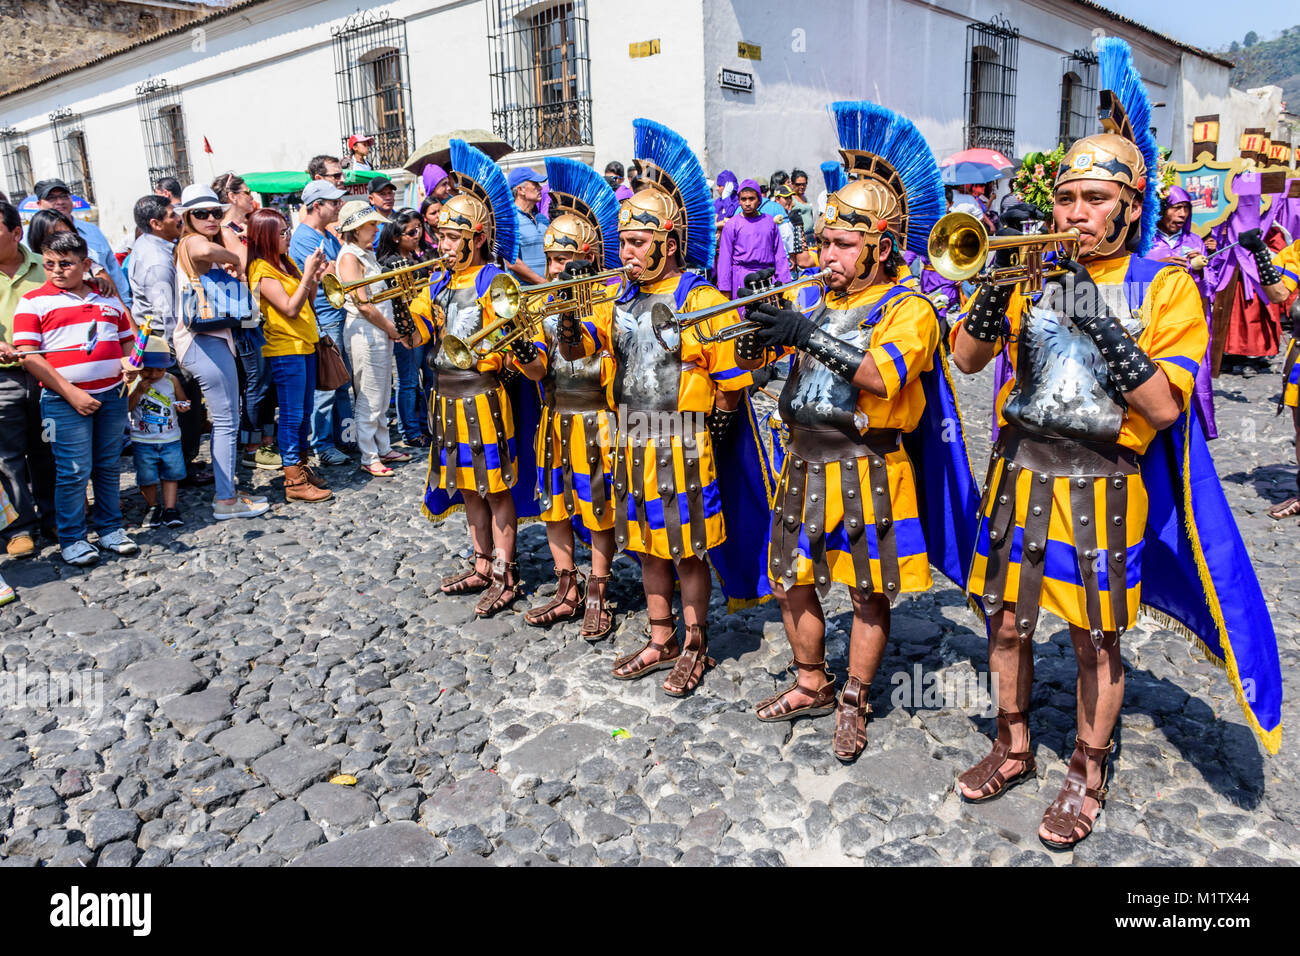 Antigua, Guatemala -  March 24, 2016: Romans signal approach of Holy Thursday procession in town with famous Holy Week celebrations Stock Photo